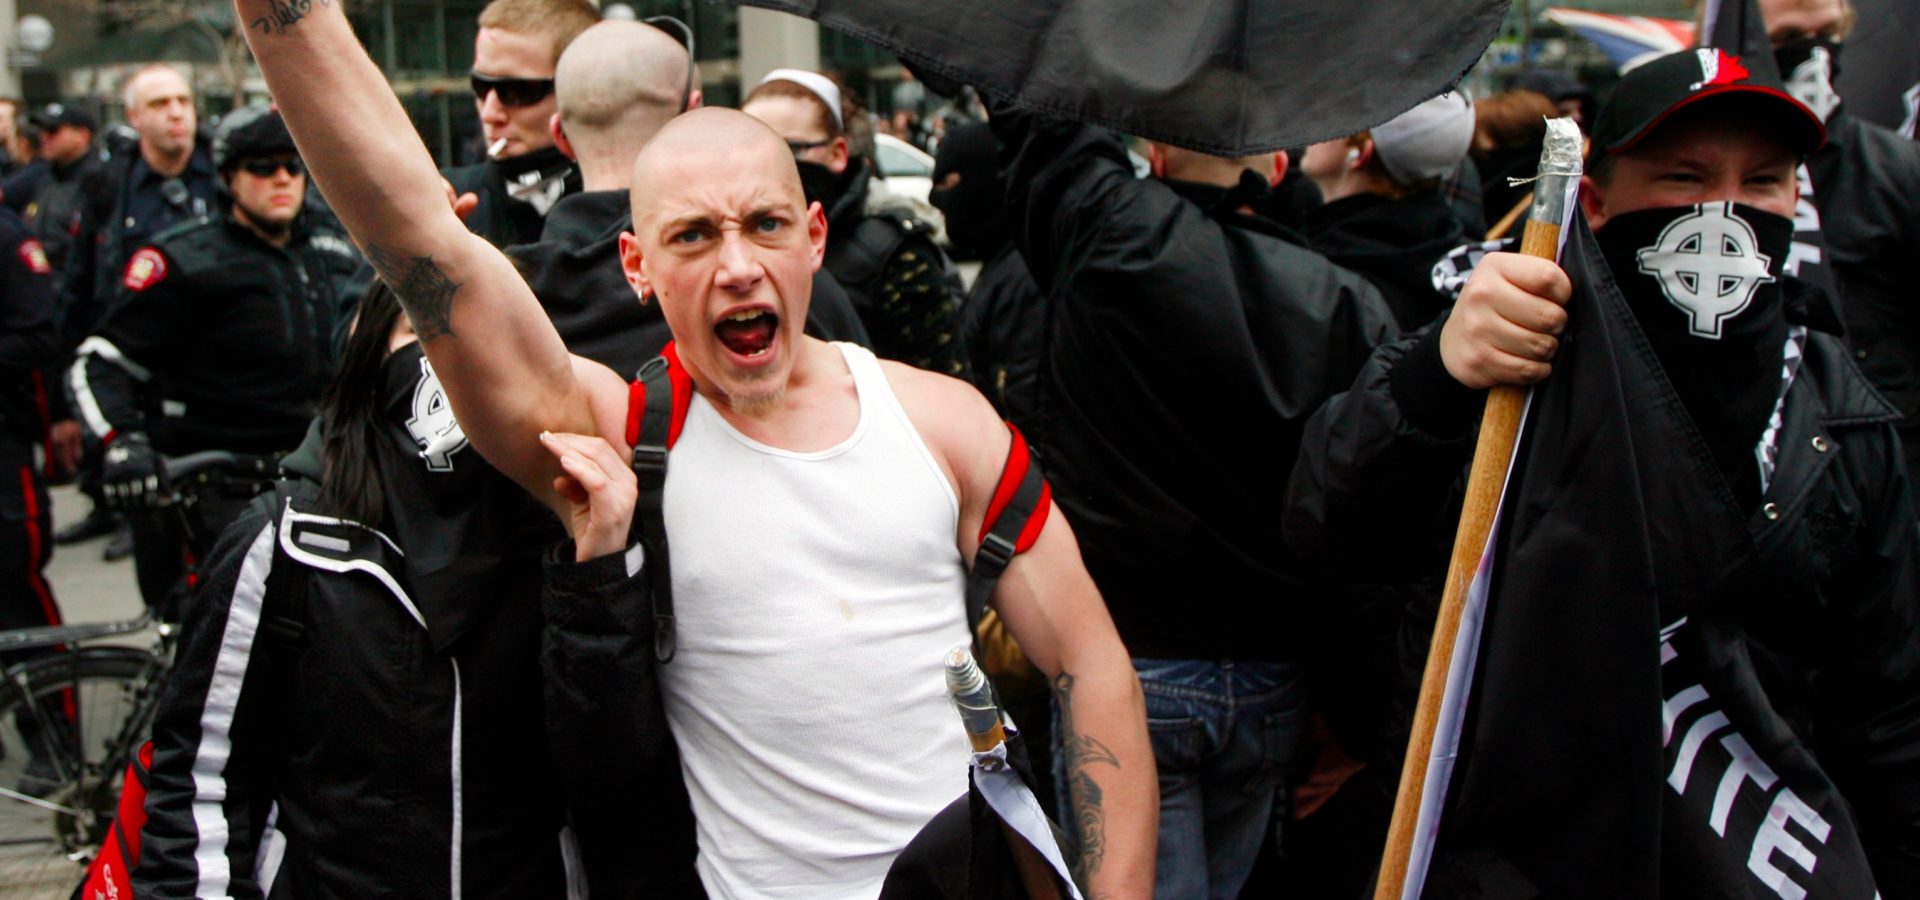 Neo-Nazi 'White Pride' group to rally in Manchester City Centre, UK.